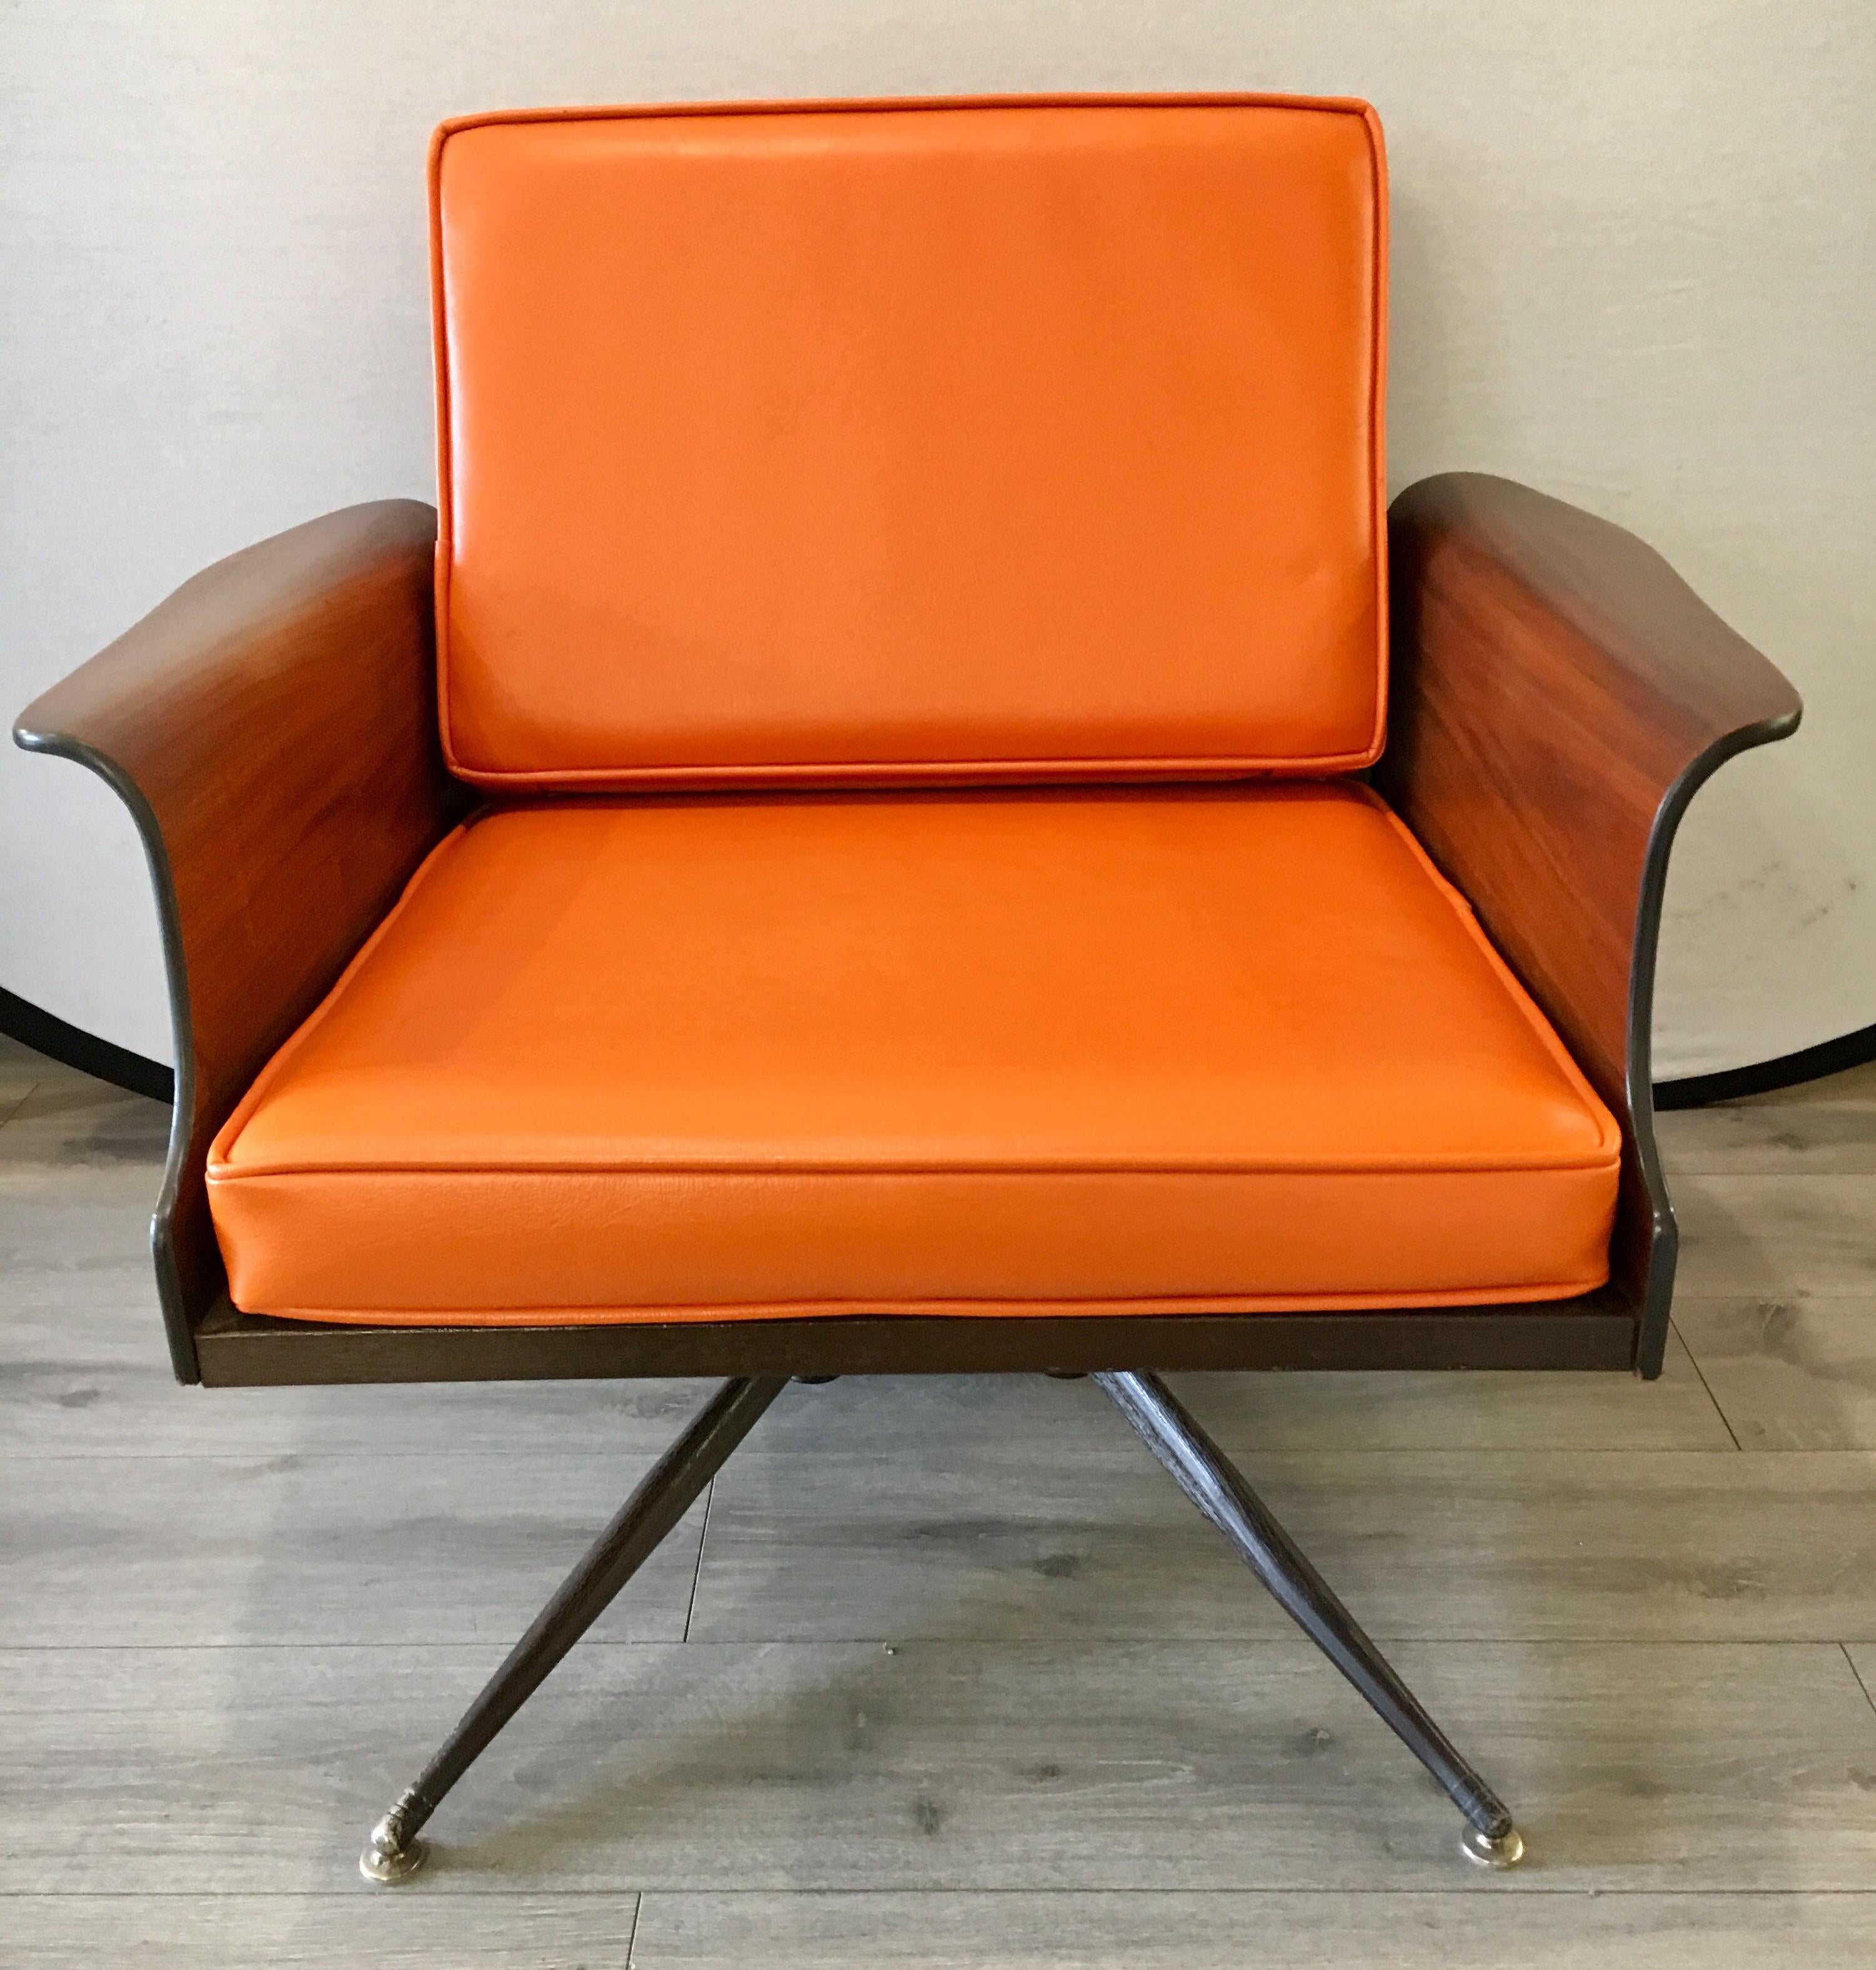 Coveted 1960s original lounge chair redone in a orange pebbled leather that looks gorgeous.
Features many Danish accents including the winged arm and streamlined legs. This chair does not swivel.